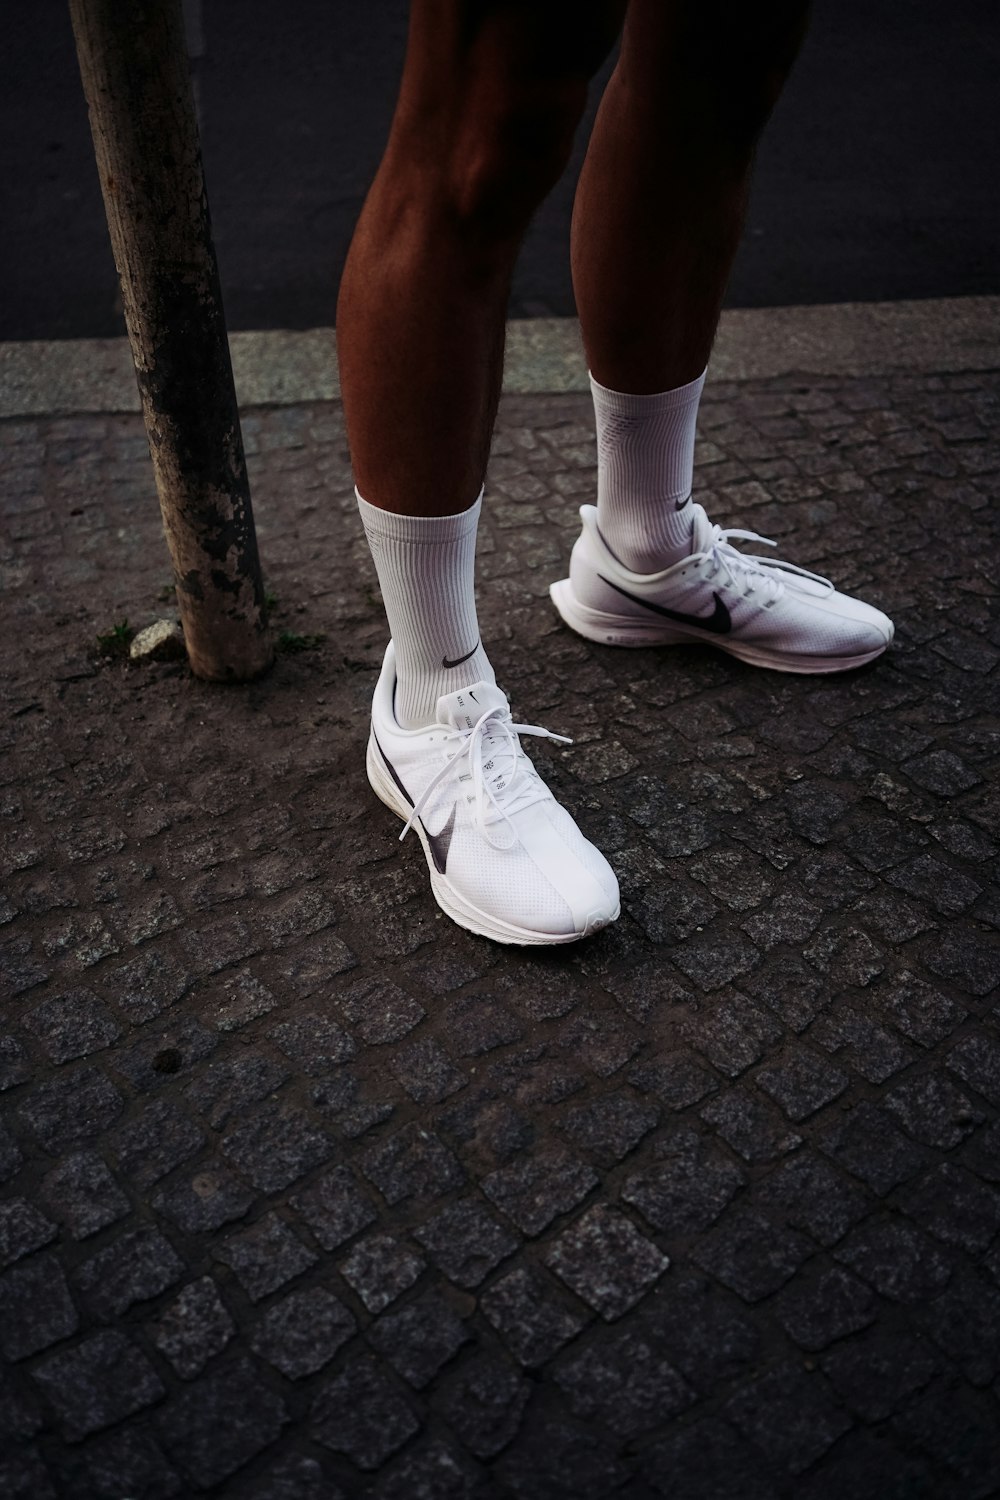 person wearing white Nike shoes